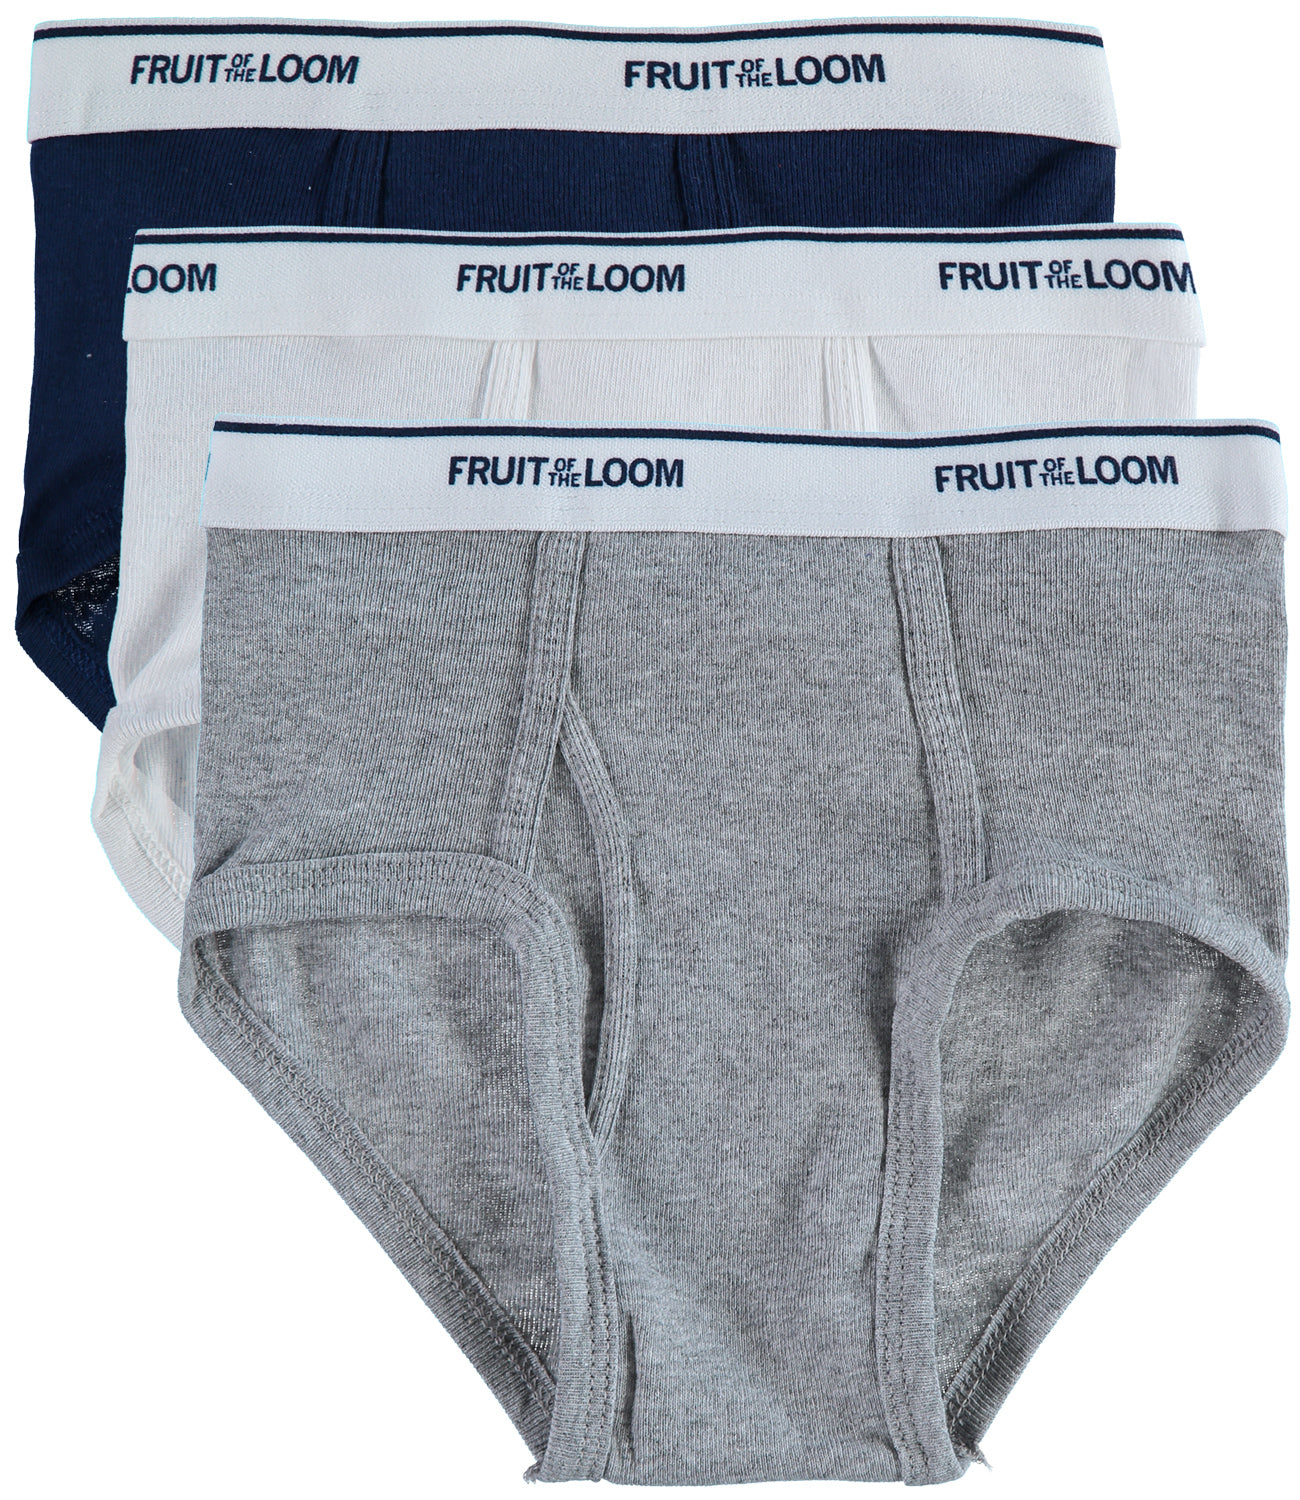 Fruit of the Loom Boys 8-20 Tag-Free Briefs, 7-Pack